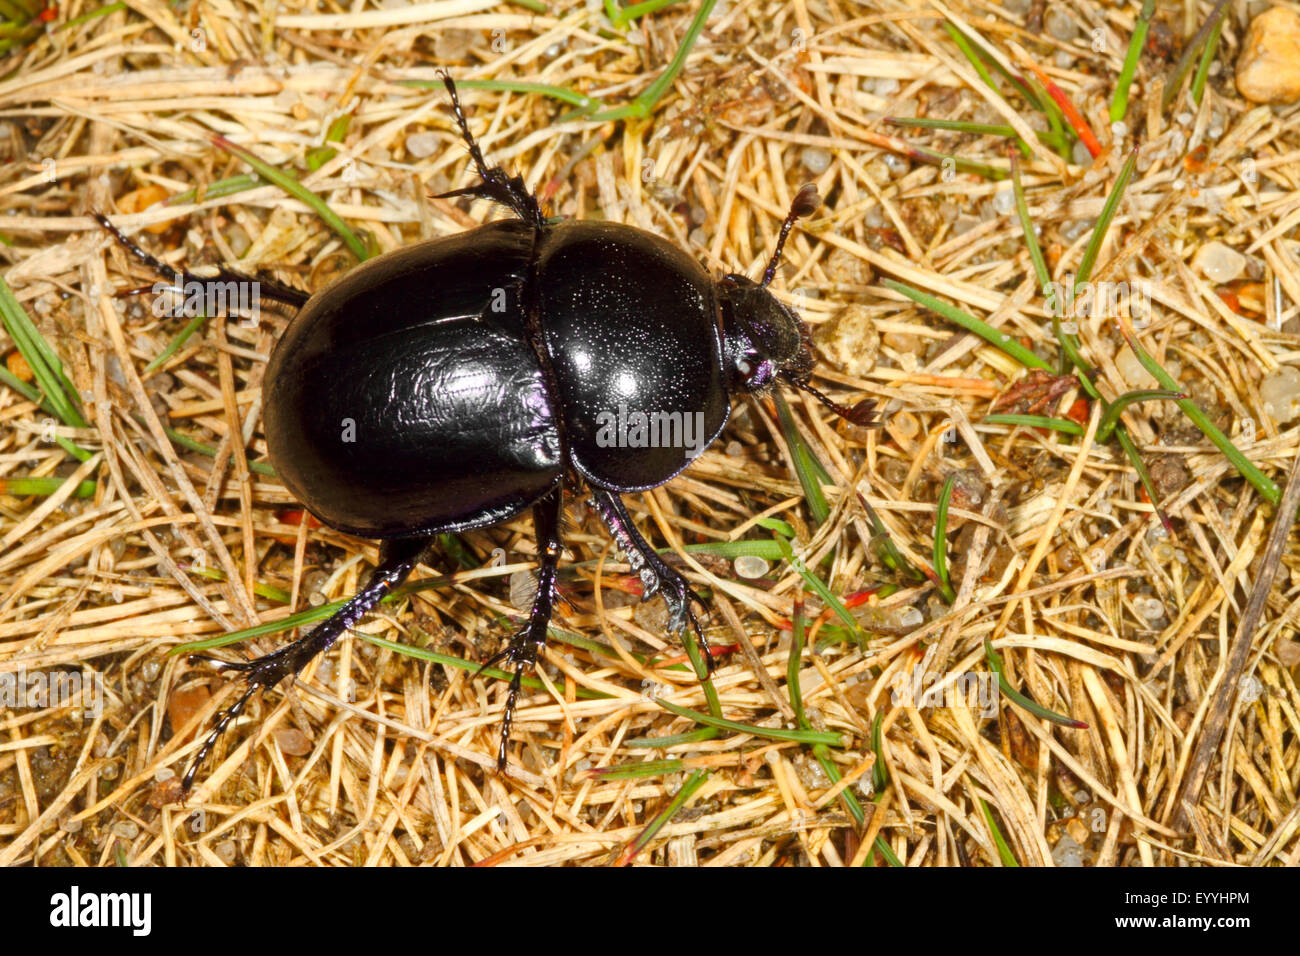 Springtime dung beetle (Geotrupes vernalis, Trypocopris vernalis), on withered grass, Germany Stock Photo